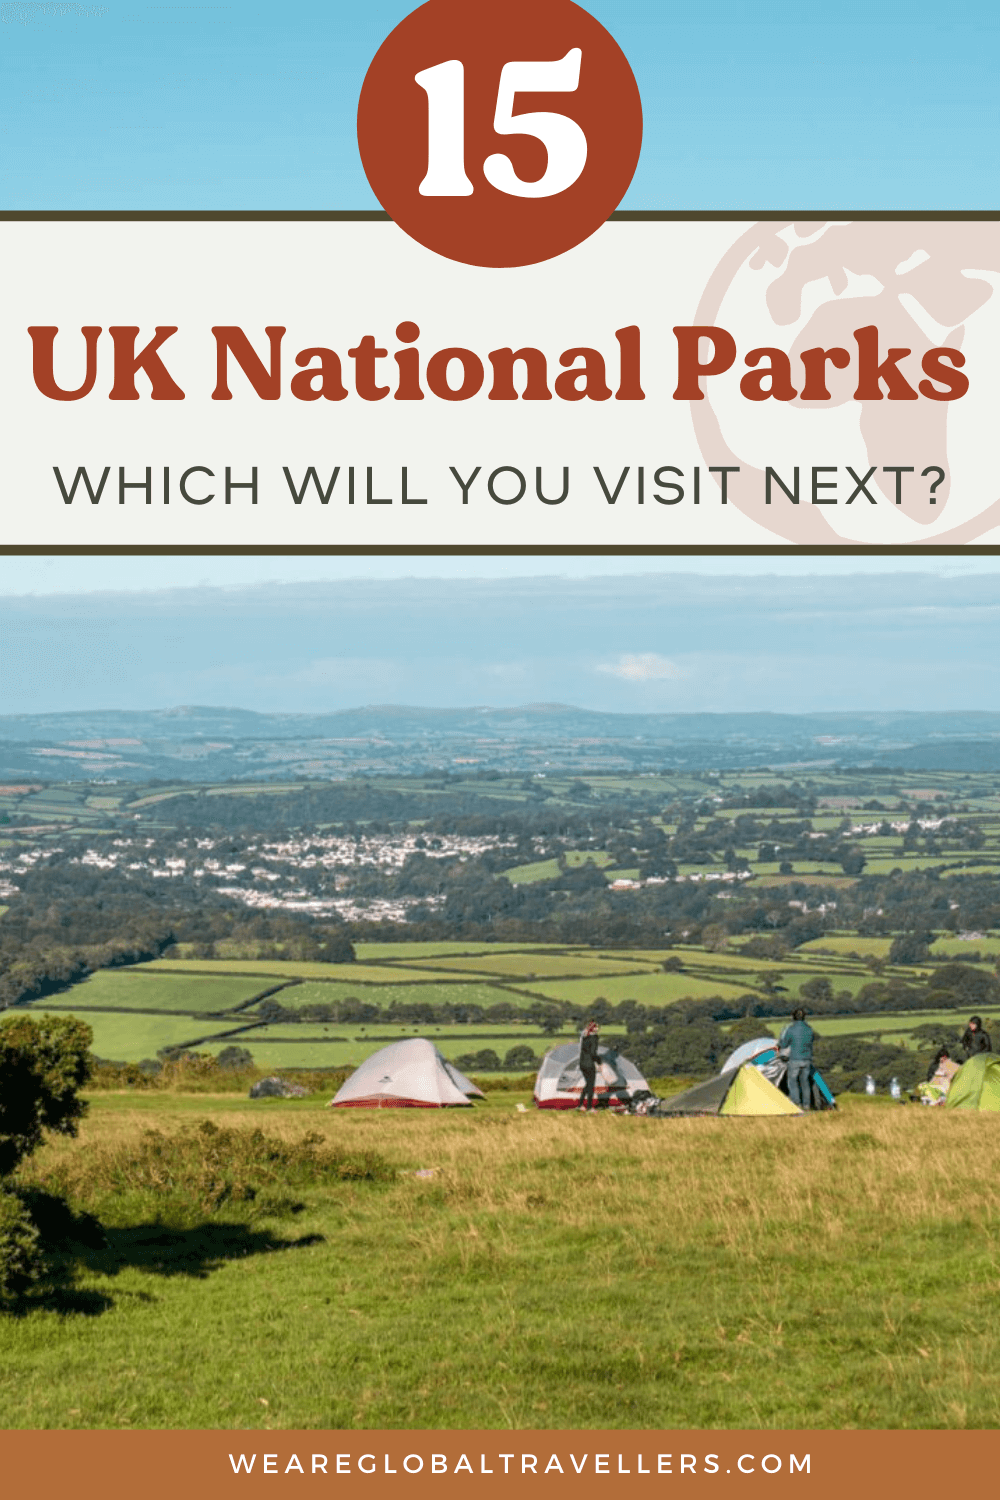 The 15 UK National Parks on a map: Which should you visit?